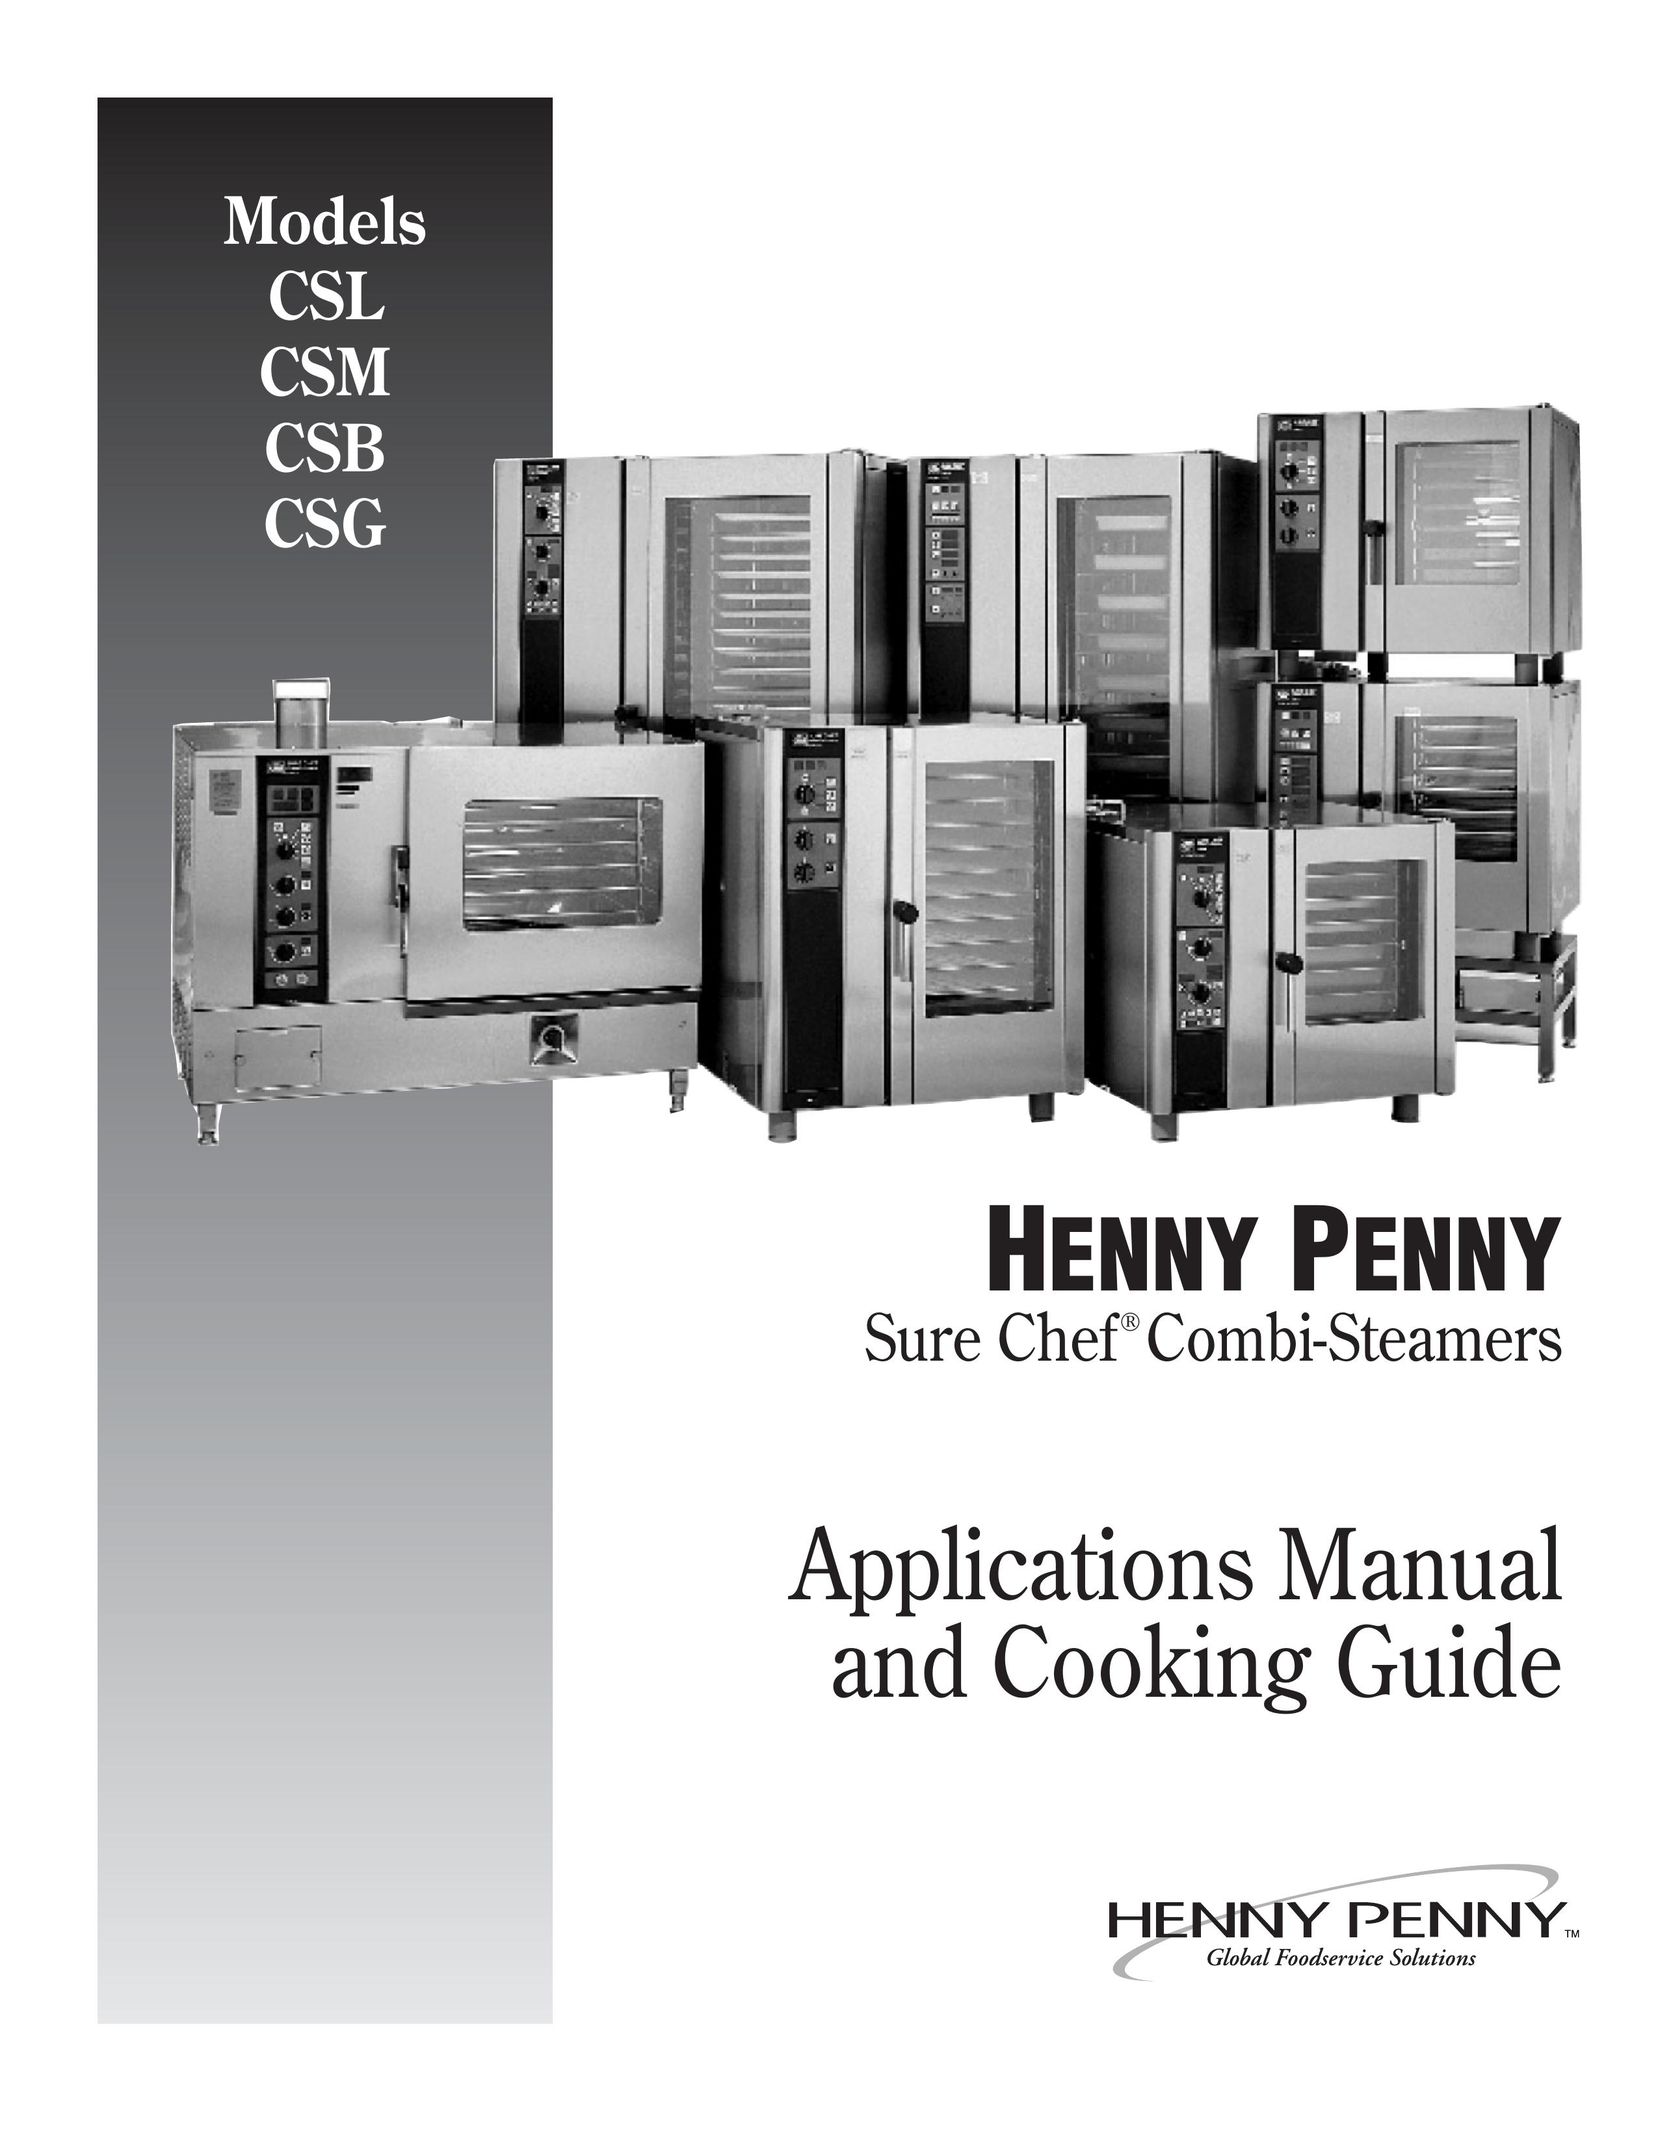 Henny Penny CSG Electric Steamer User Manual